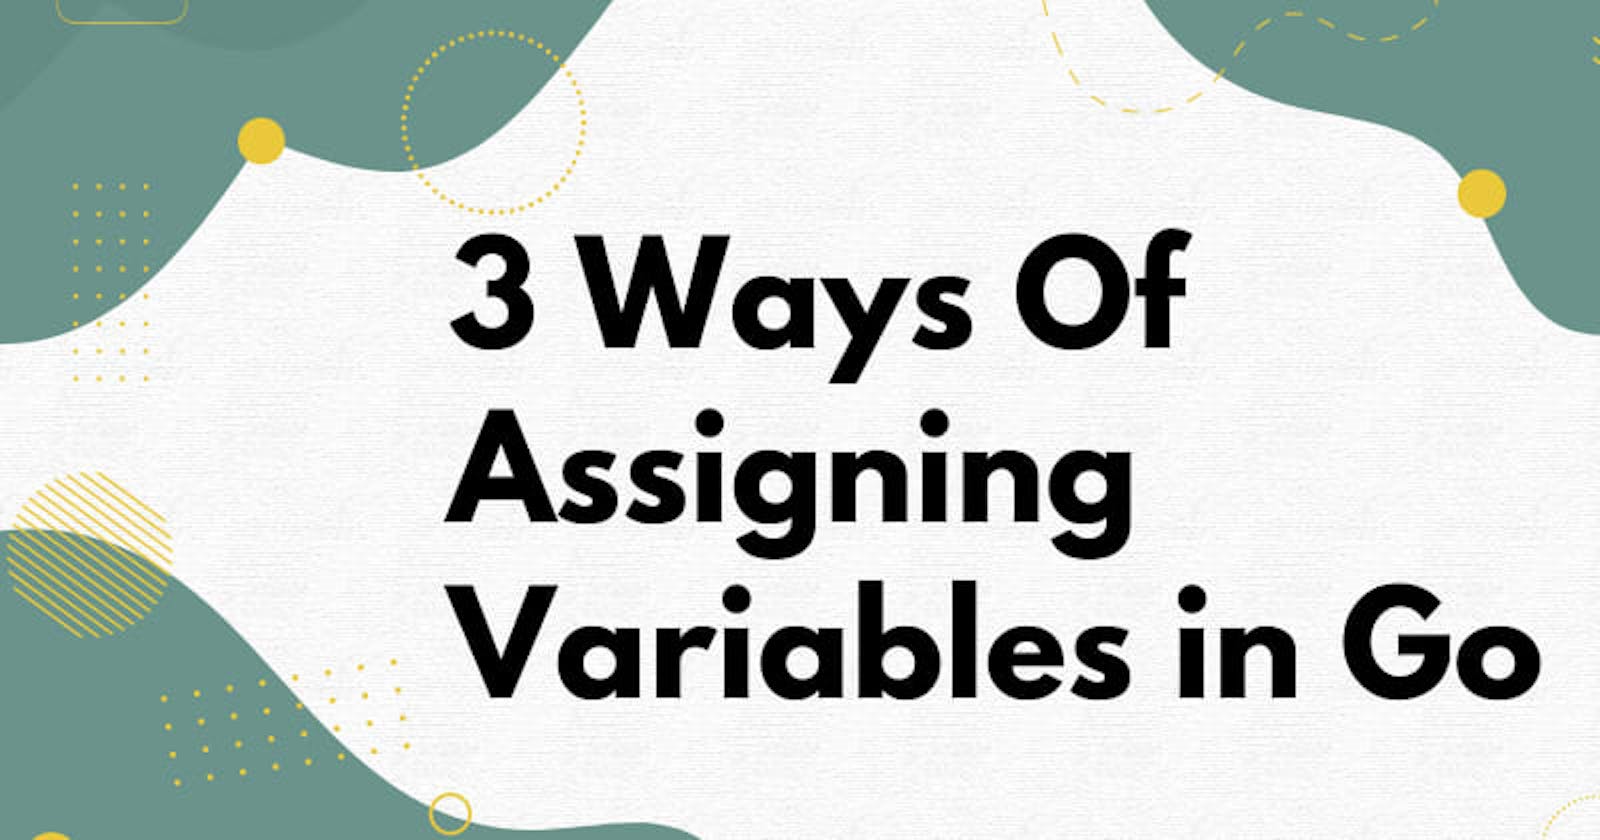 3 Ways Of Assigning Variables in Go